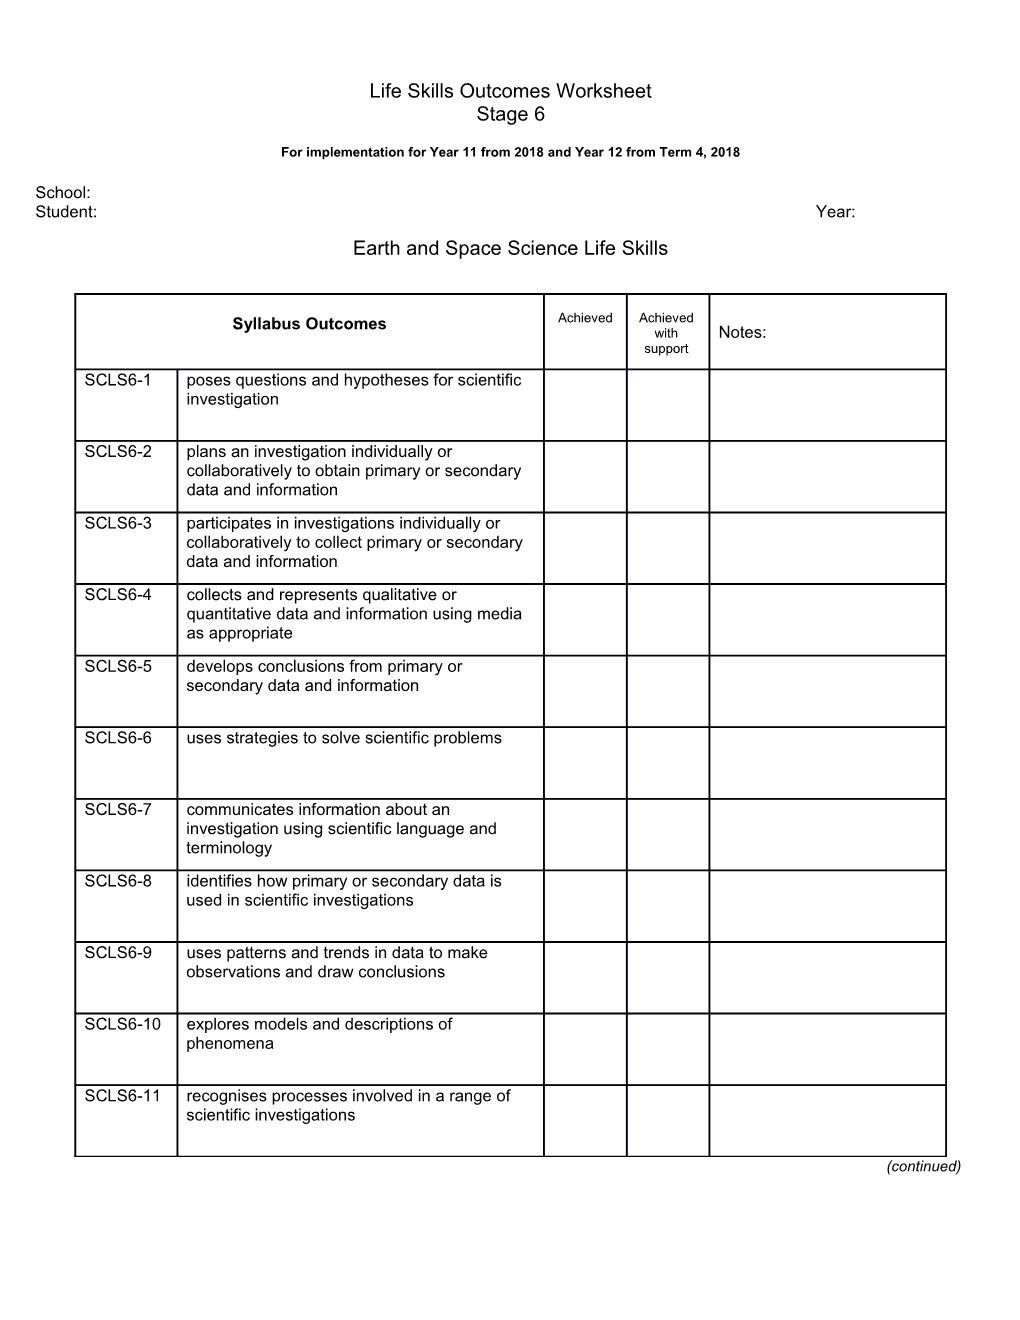 Life Skills Outcomes Worksheet - Earth and Space Science